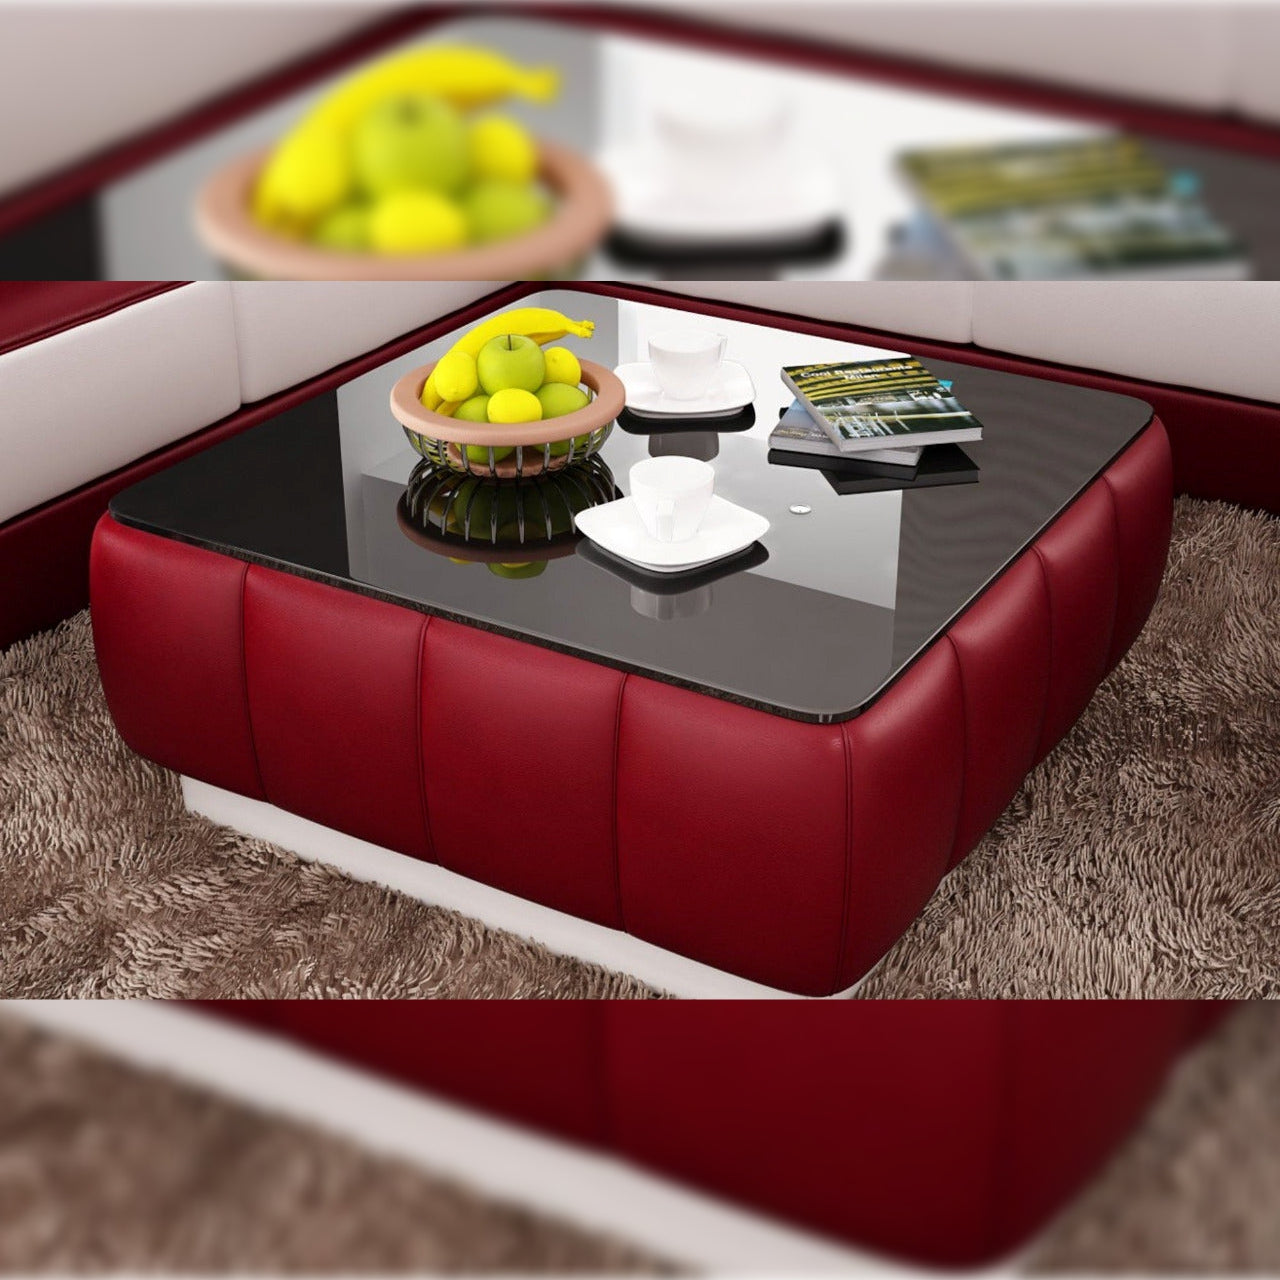 Leatherette Coffee Table Contemporary Red and White Leatherette Coffee Table Black Glass Table Top